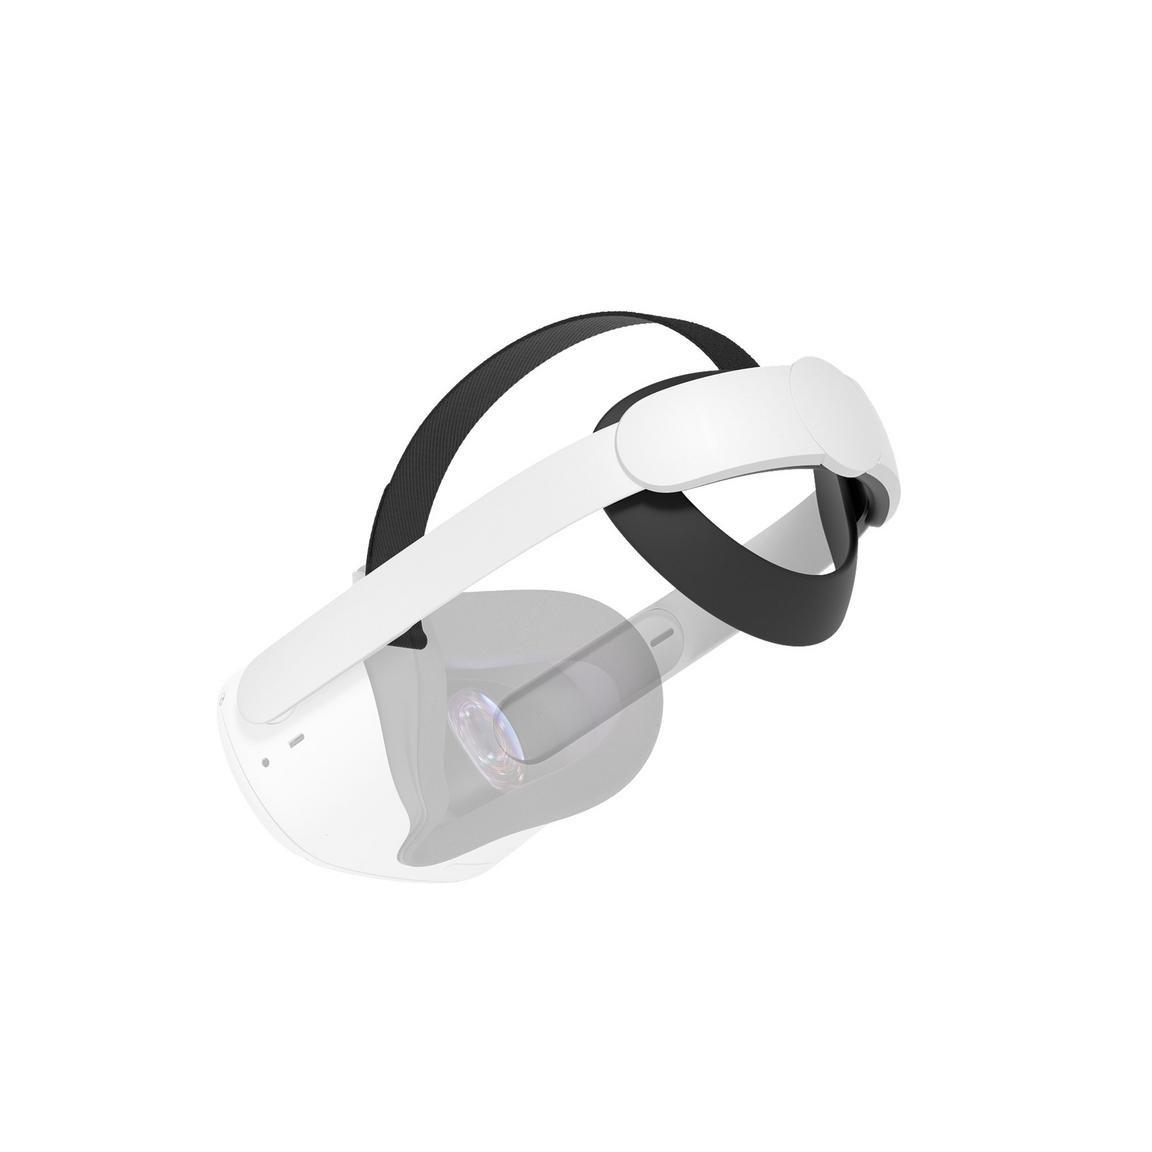 Atrix VR Wired Earbuds for Meta Quest 2 GameStop Exclusive